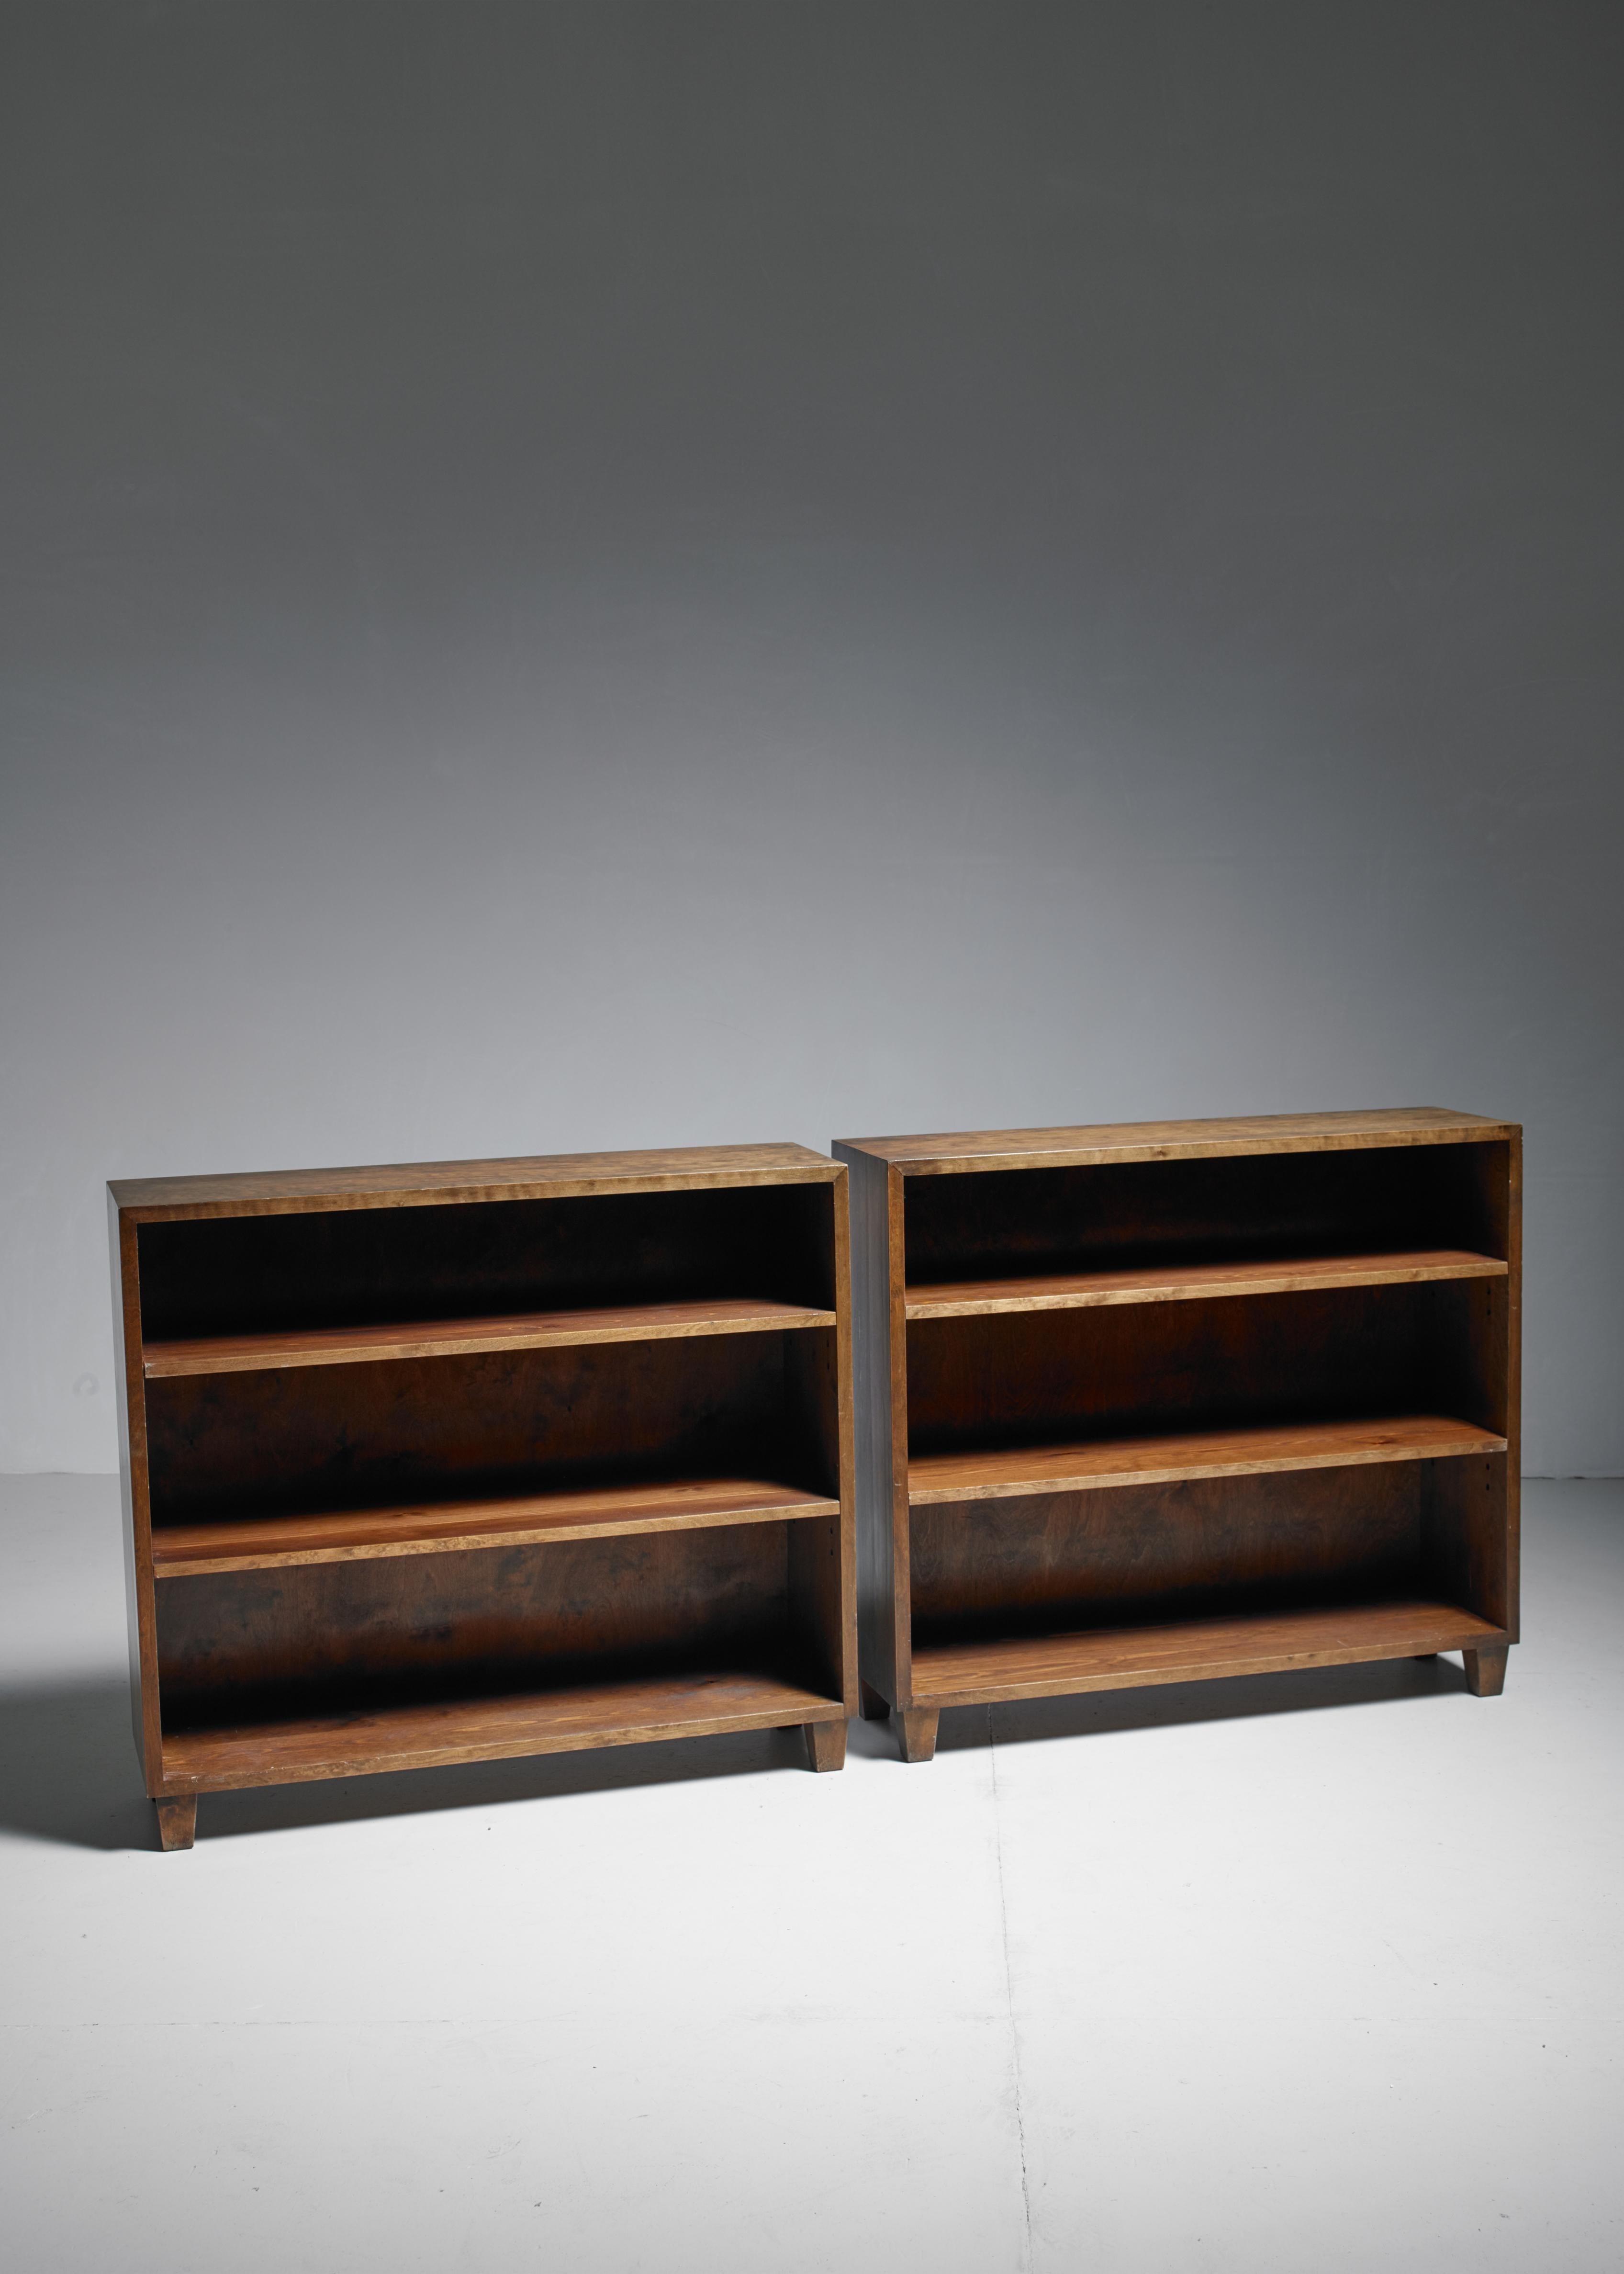 A pair of bookcases by Nordiska Kompaniet, made of birch and standing on four legs. 
These pieces are labeled by Nordiska with the serial number 44756, which indicates they were made in 1943.
 